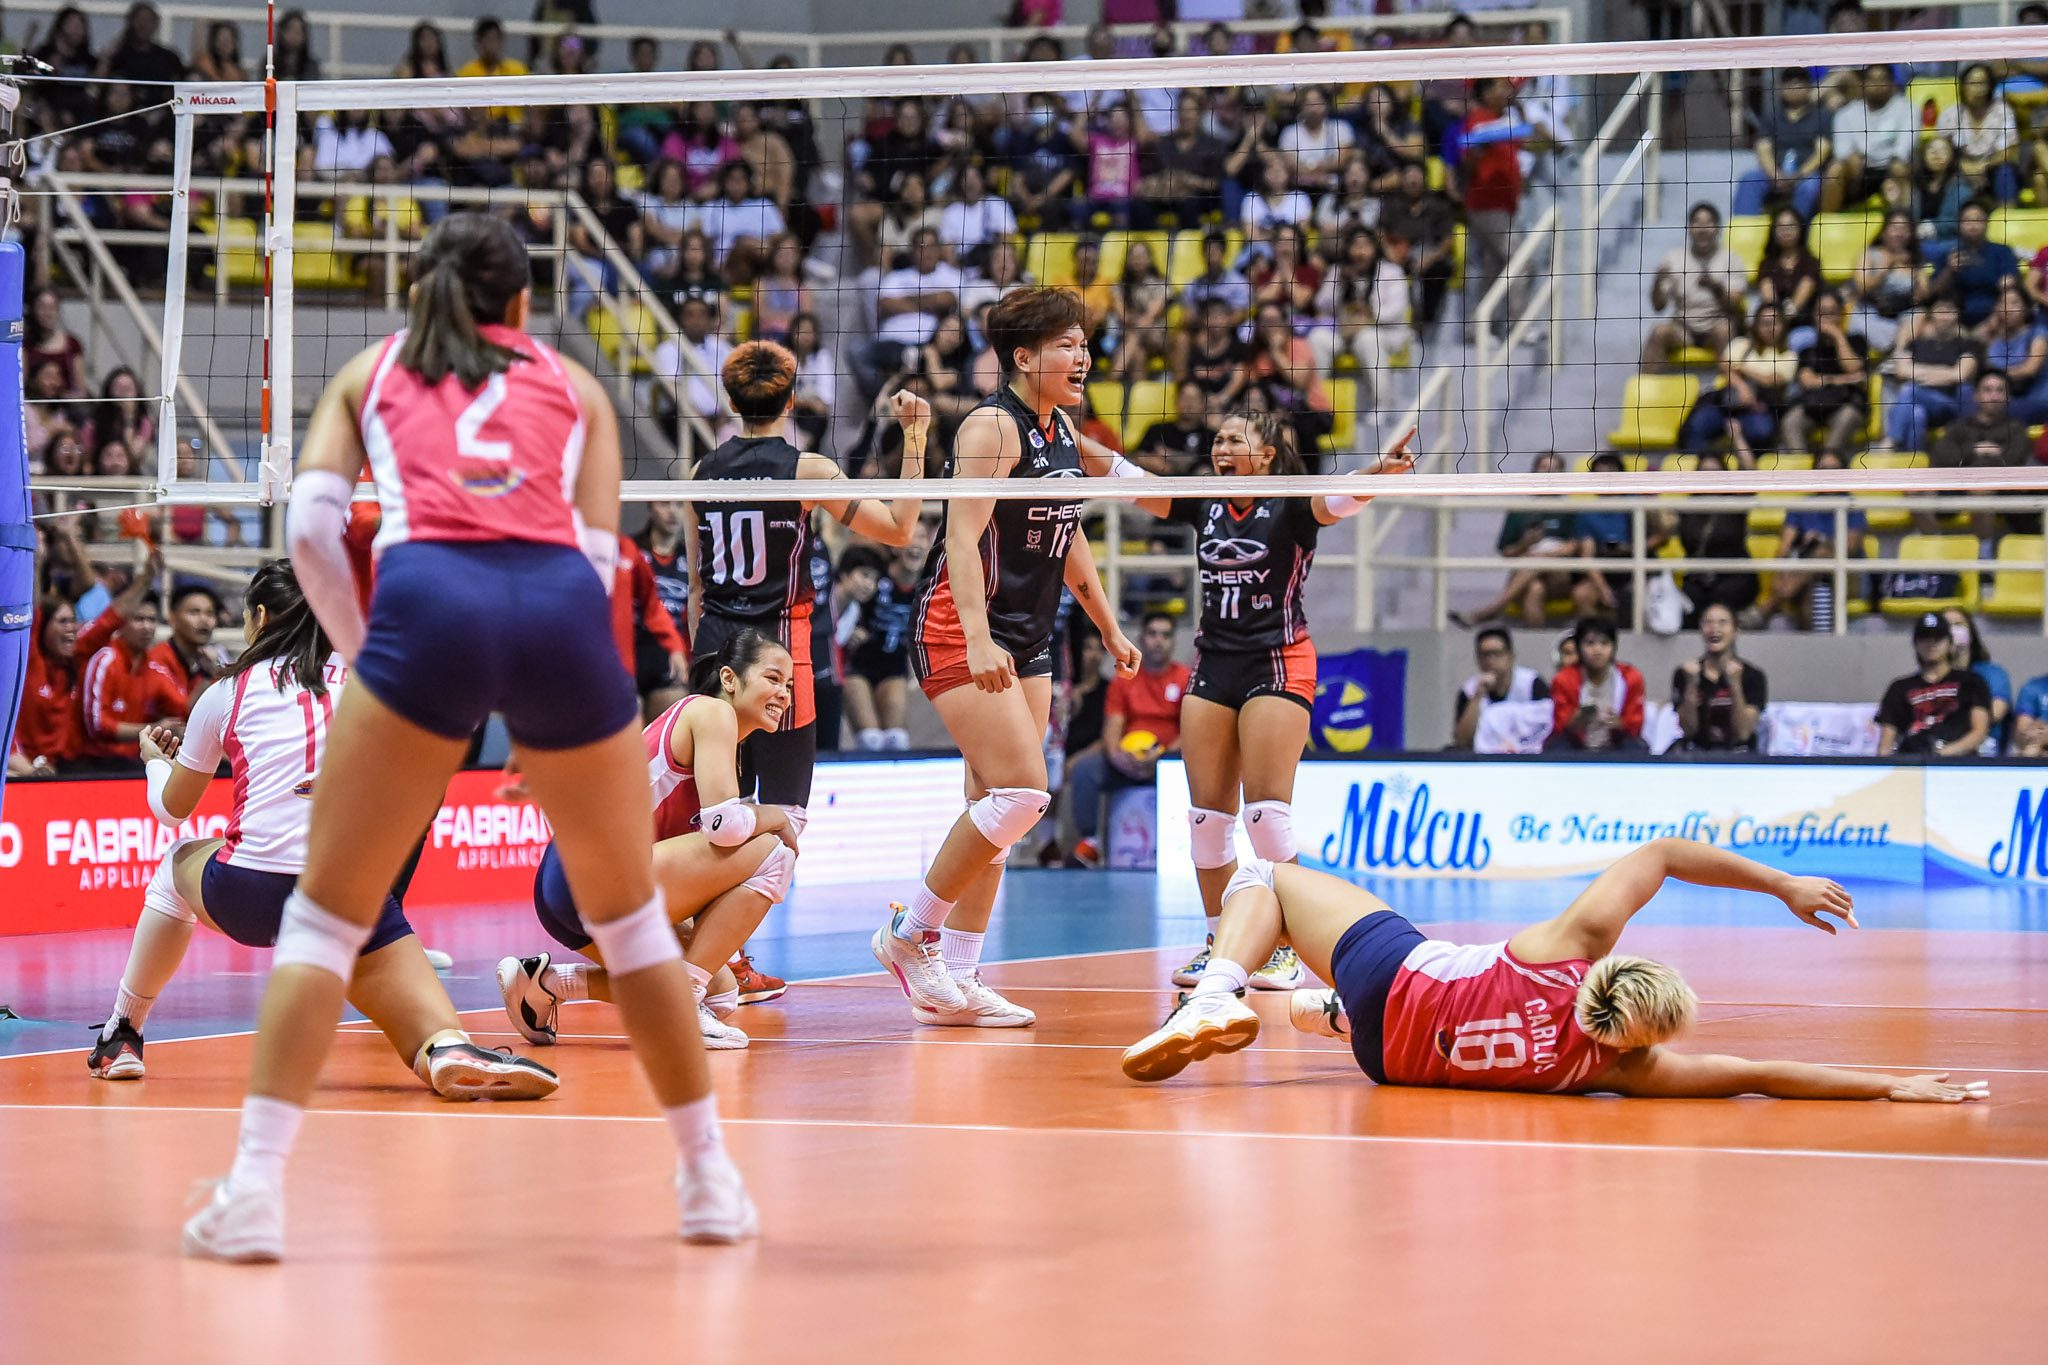 Fuel to fire: First Creamline sweep loss in 5 years a blessing, says Alyssa Valdez